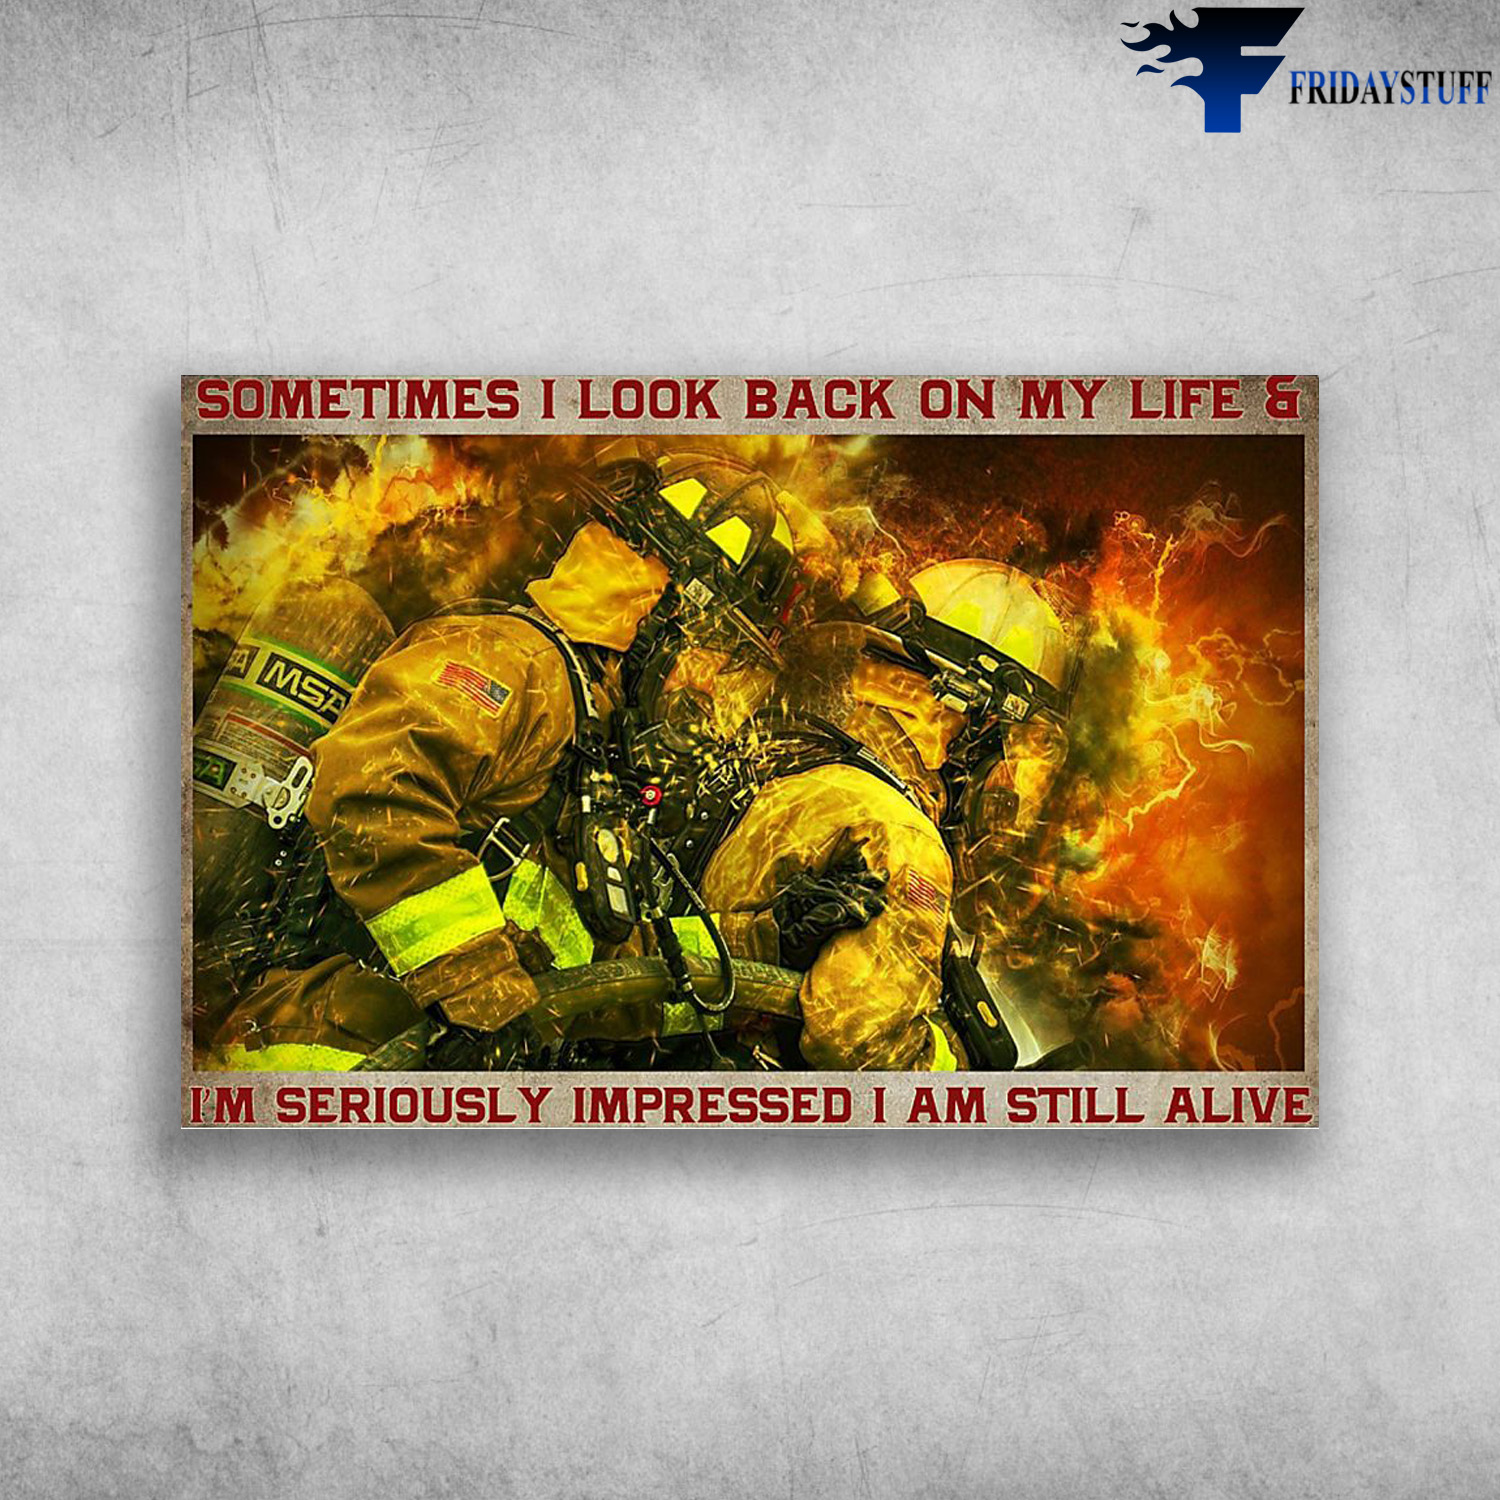 The Firefighter - Sometimes I Look Back On My Life And I'm Seriously Impressed, I Am Still Alive